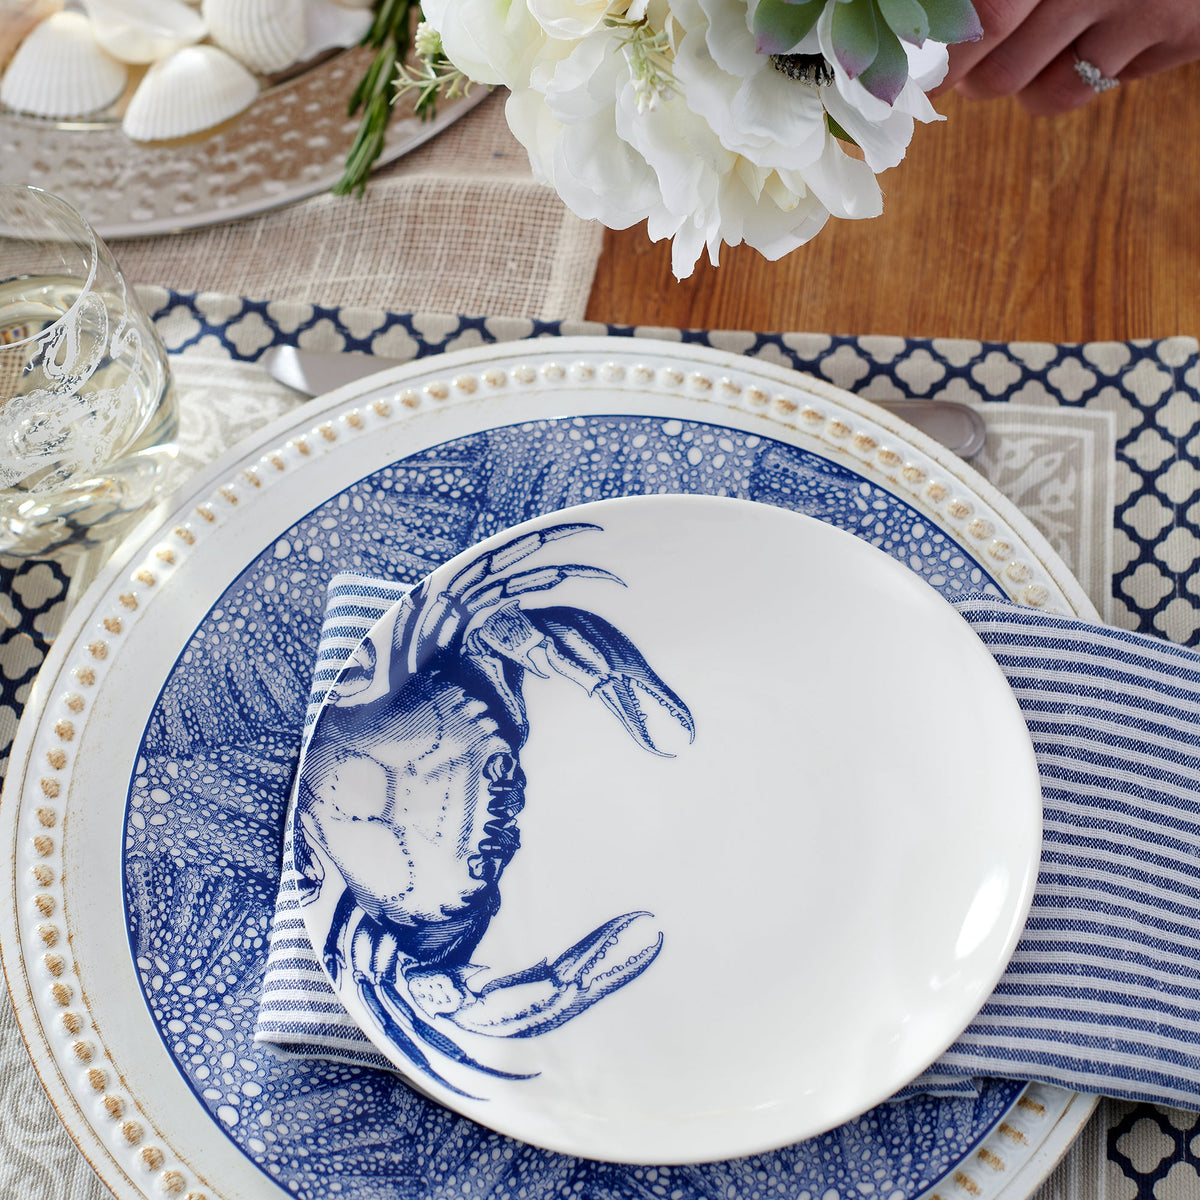 A table setting with heirloom-quality dinnerware boasts a navy and white Caskata Artisanal Home Crab Small Plates, placed on a striped napkin and larger plate. A glass of water, a bouquet of white flowers, and shells in the background complete the charming scene.